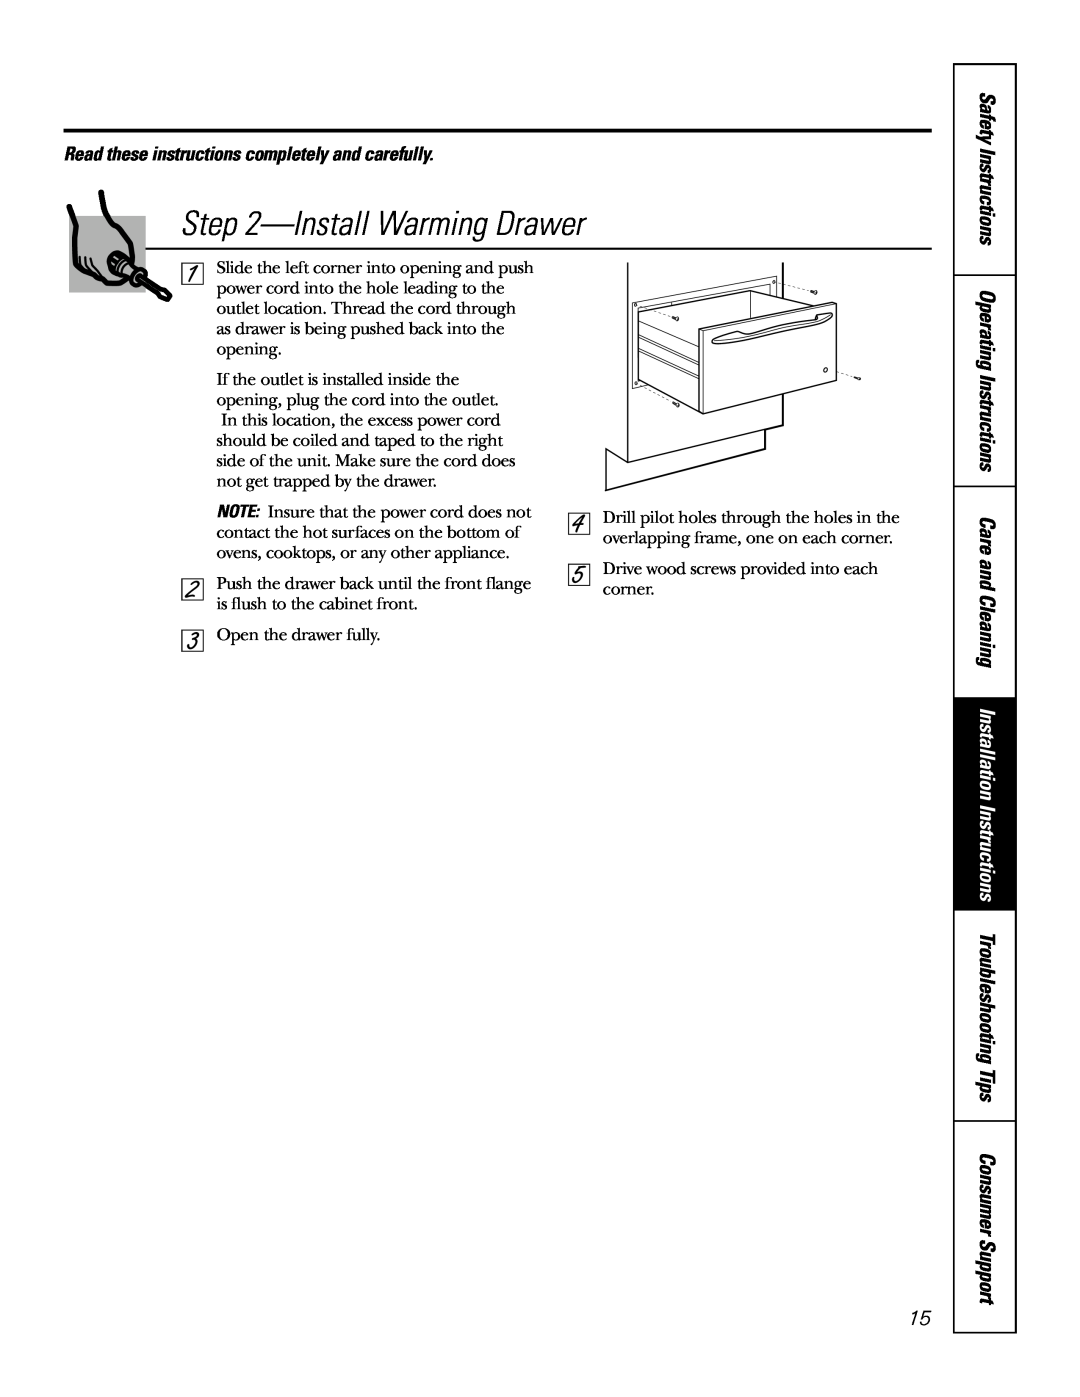 GE JTD915 owner manual Install Warming Drawer, Read these instructions completely and carefully, Safety Instructions 